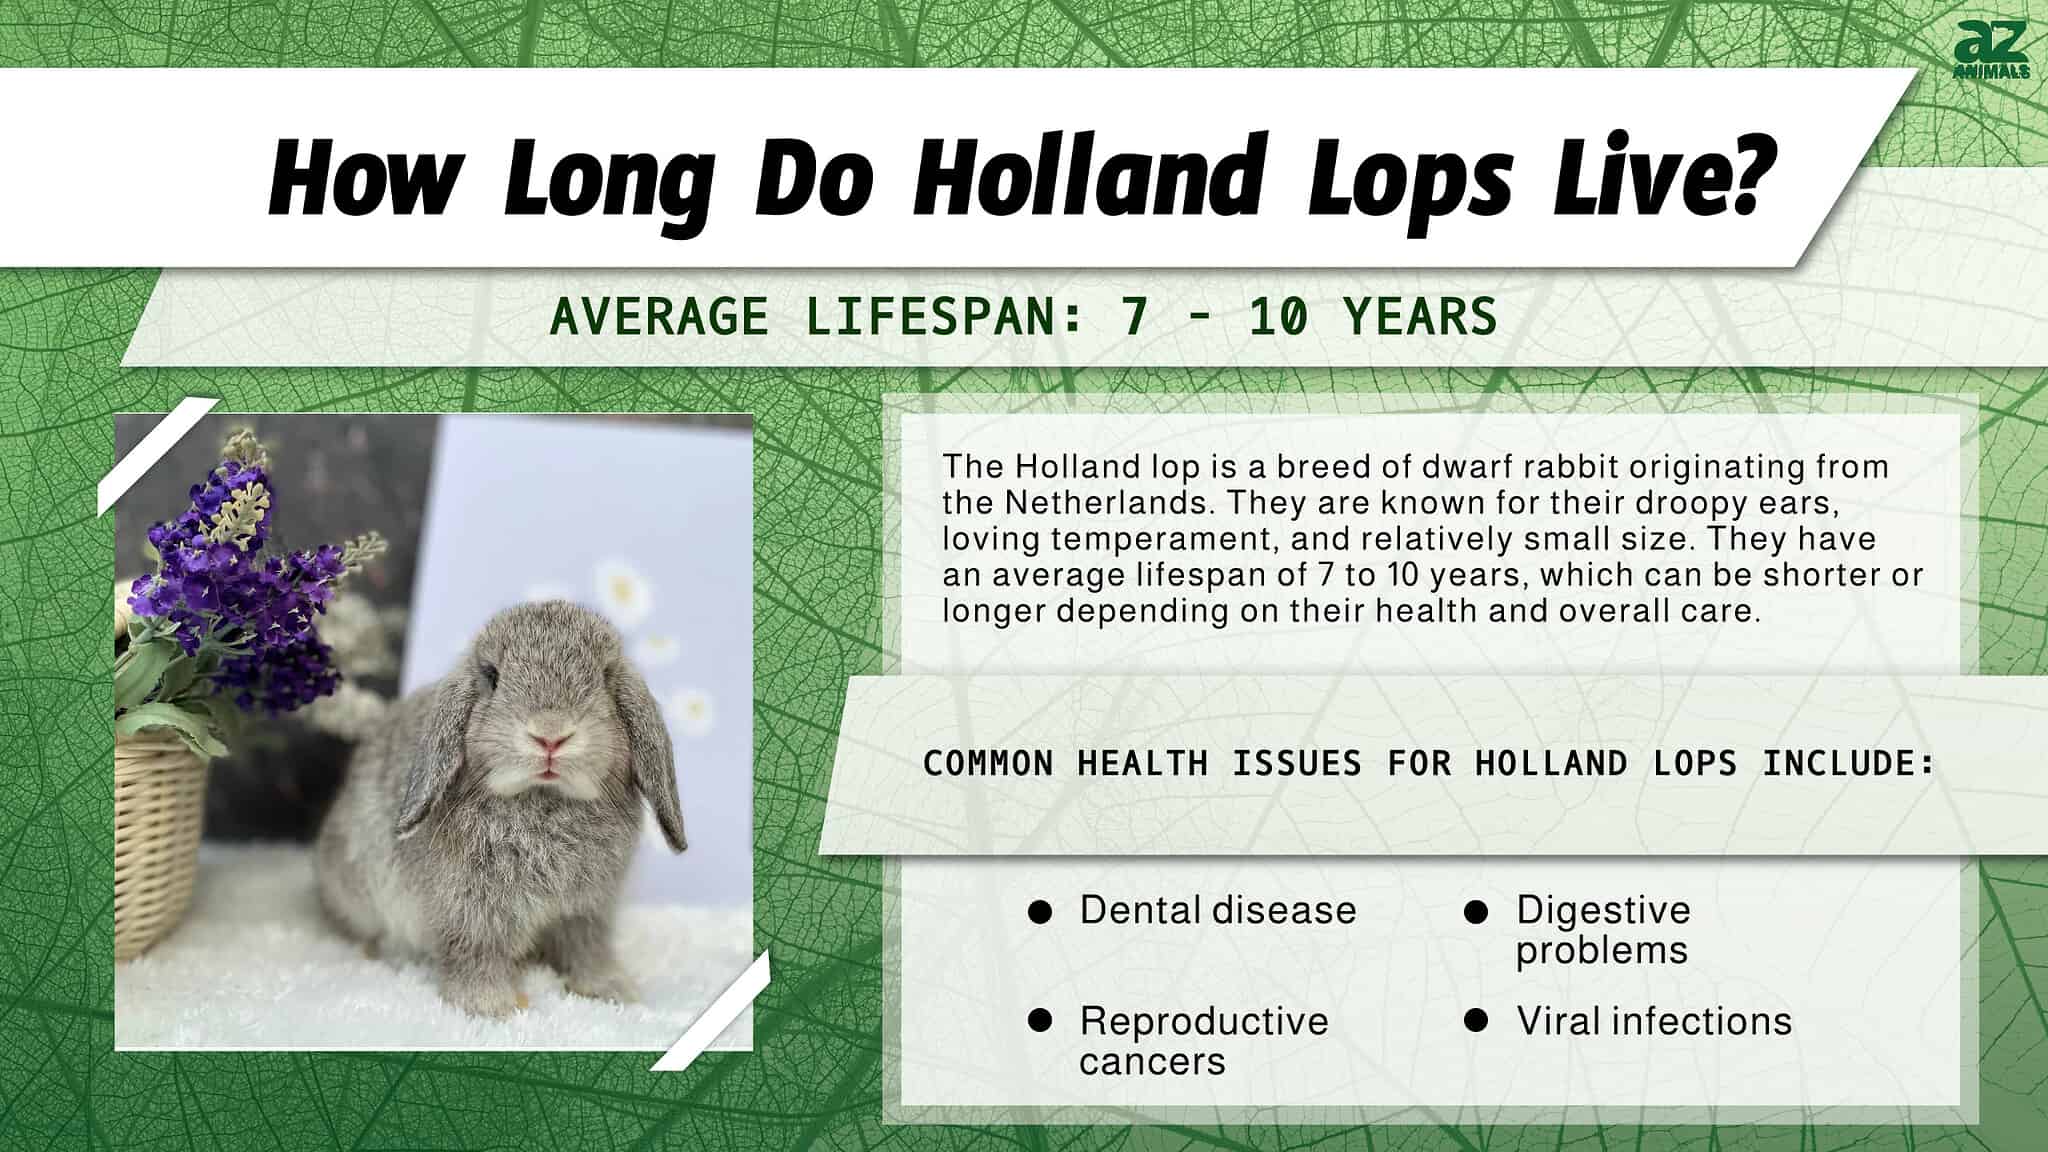 Holland Lop Lifespan How Long Do These Rabbits Live? AZ Animals